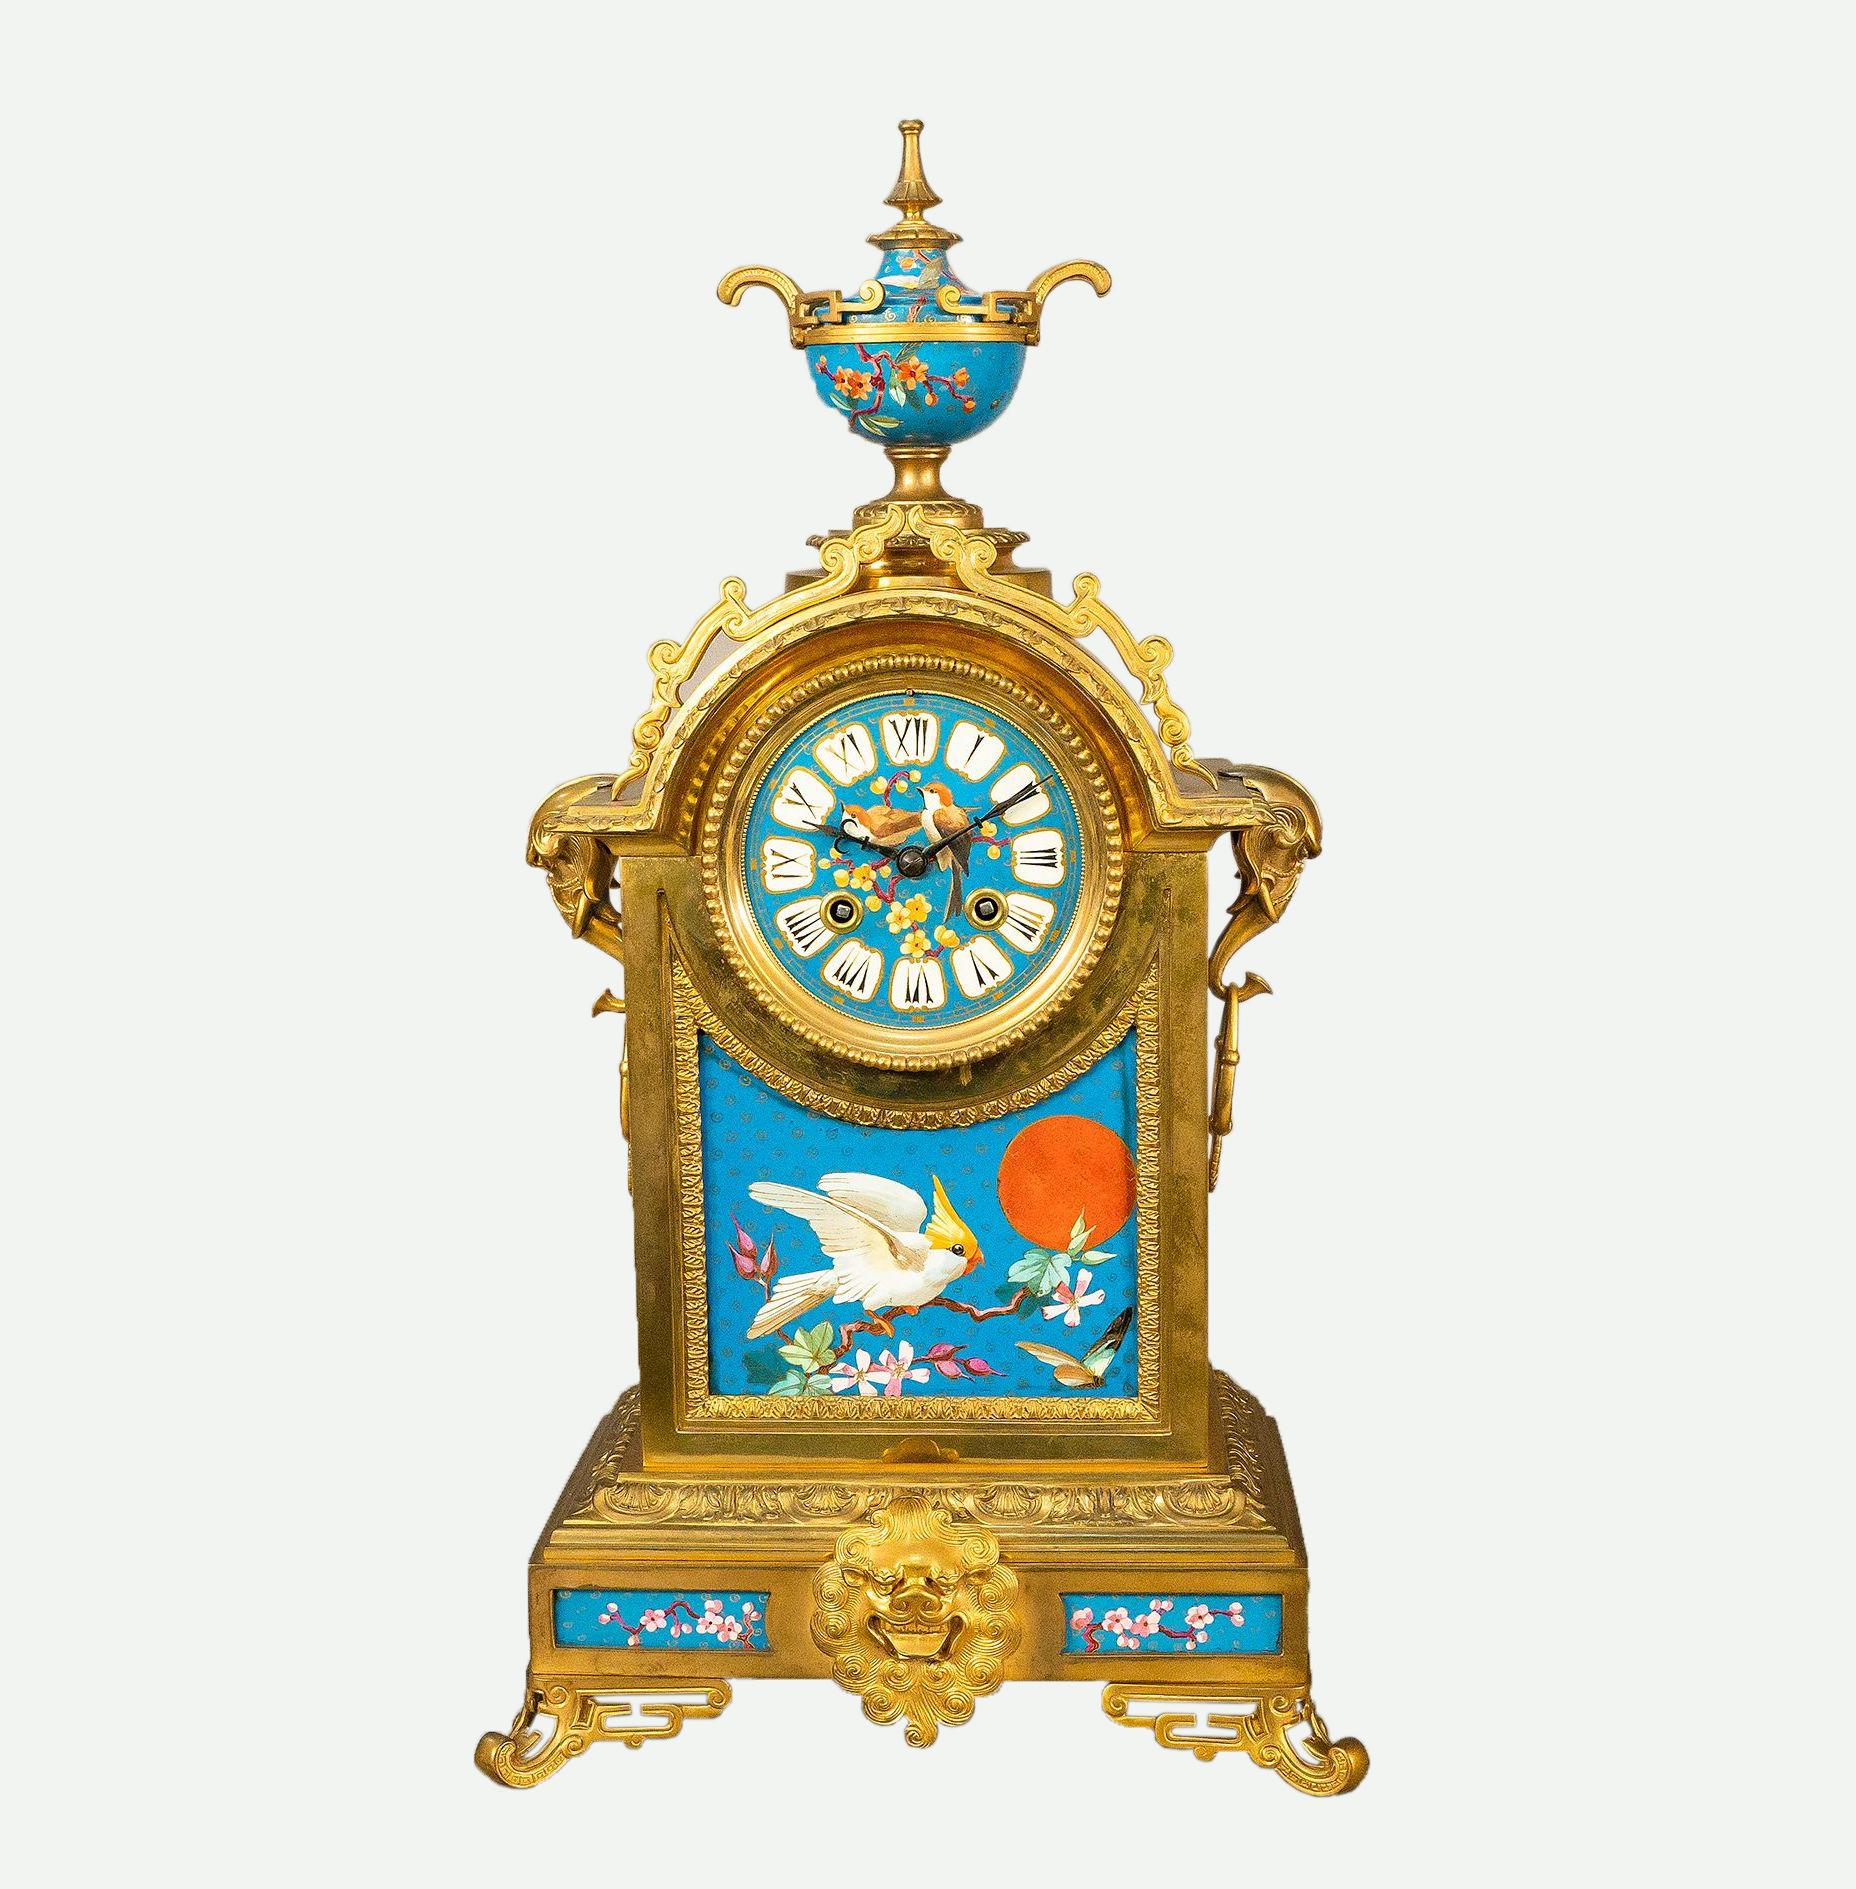 A very fine antique 19th century French gilt bronze and hand painted porcelain 3-piece clock set in the Japonisme style. The clock finely decorated with porcelain plaques, painted in the Japanese style with Cherry blossom branches. The front plaque